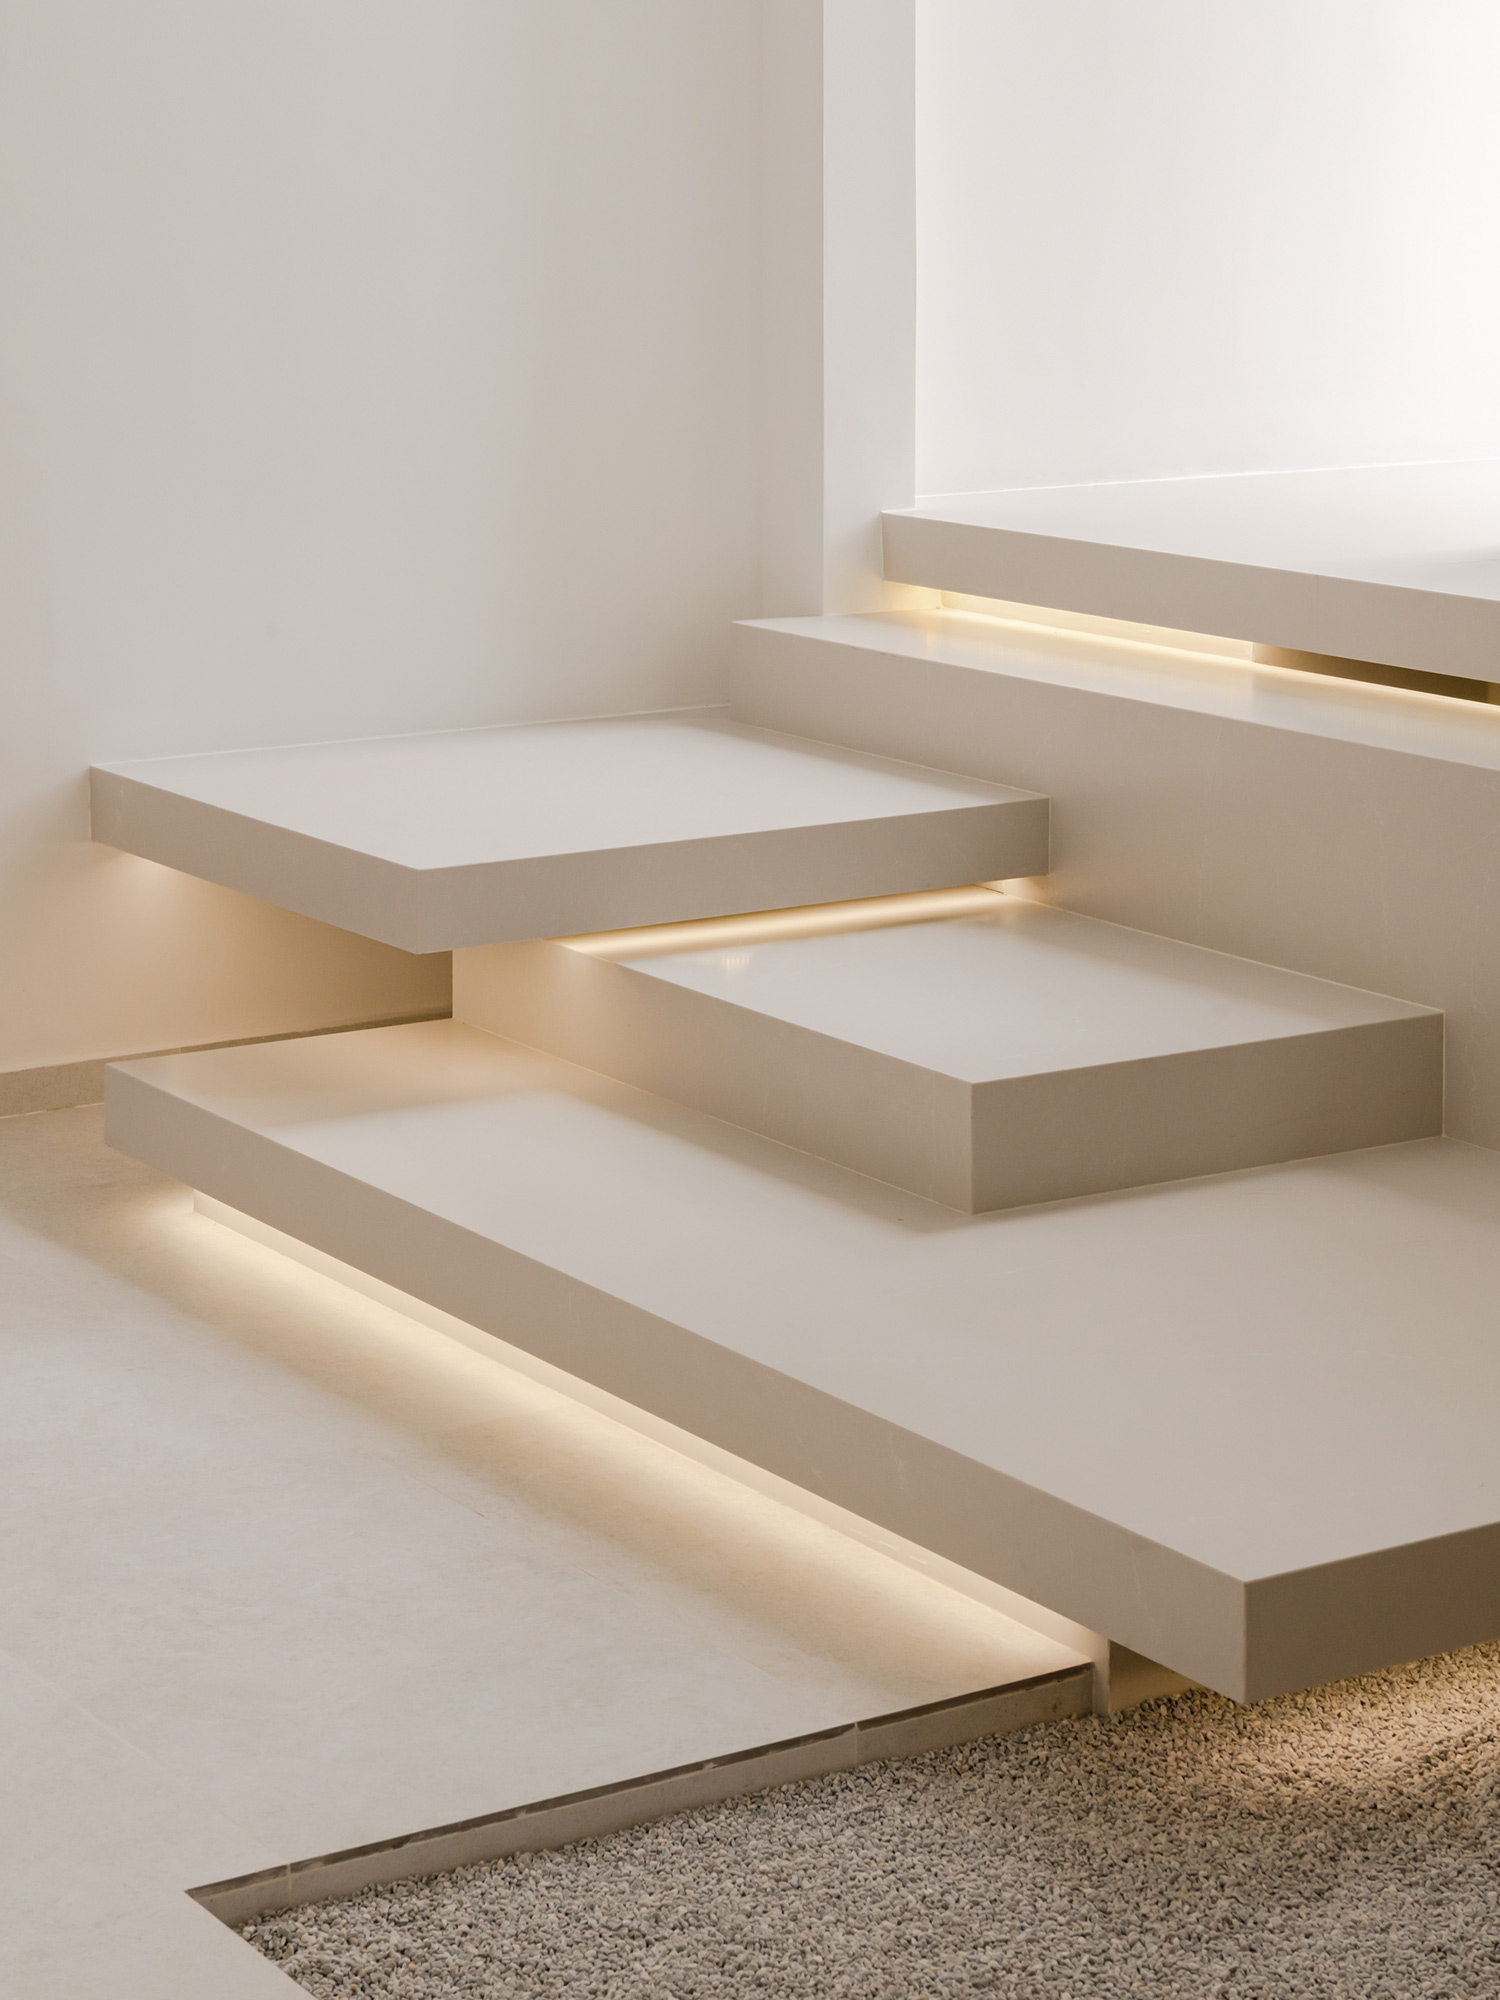 Image of DYP DualSpaceStudio JadeHill Stairs 005 in A floating staircase teams up with Silestone to achieve its elegant design - Cosentino